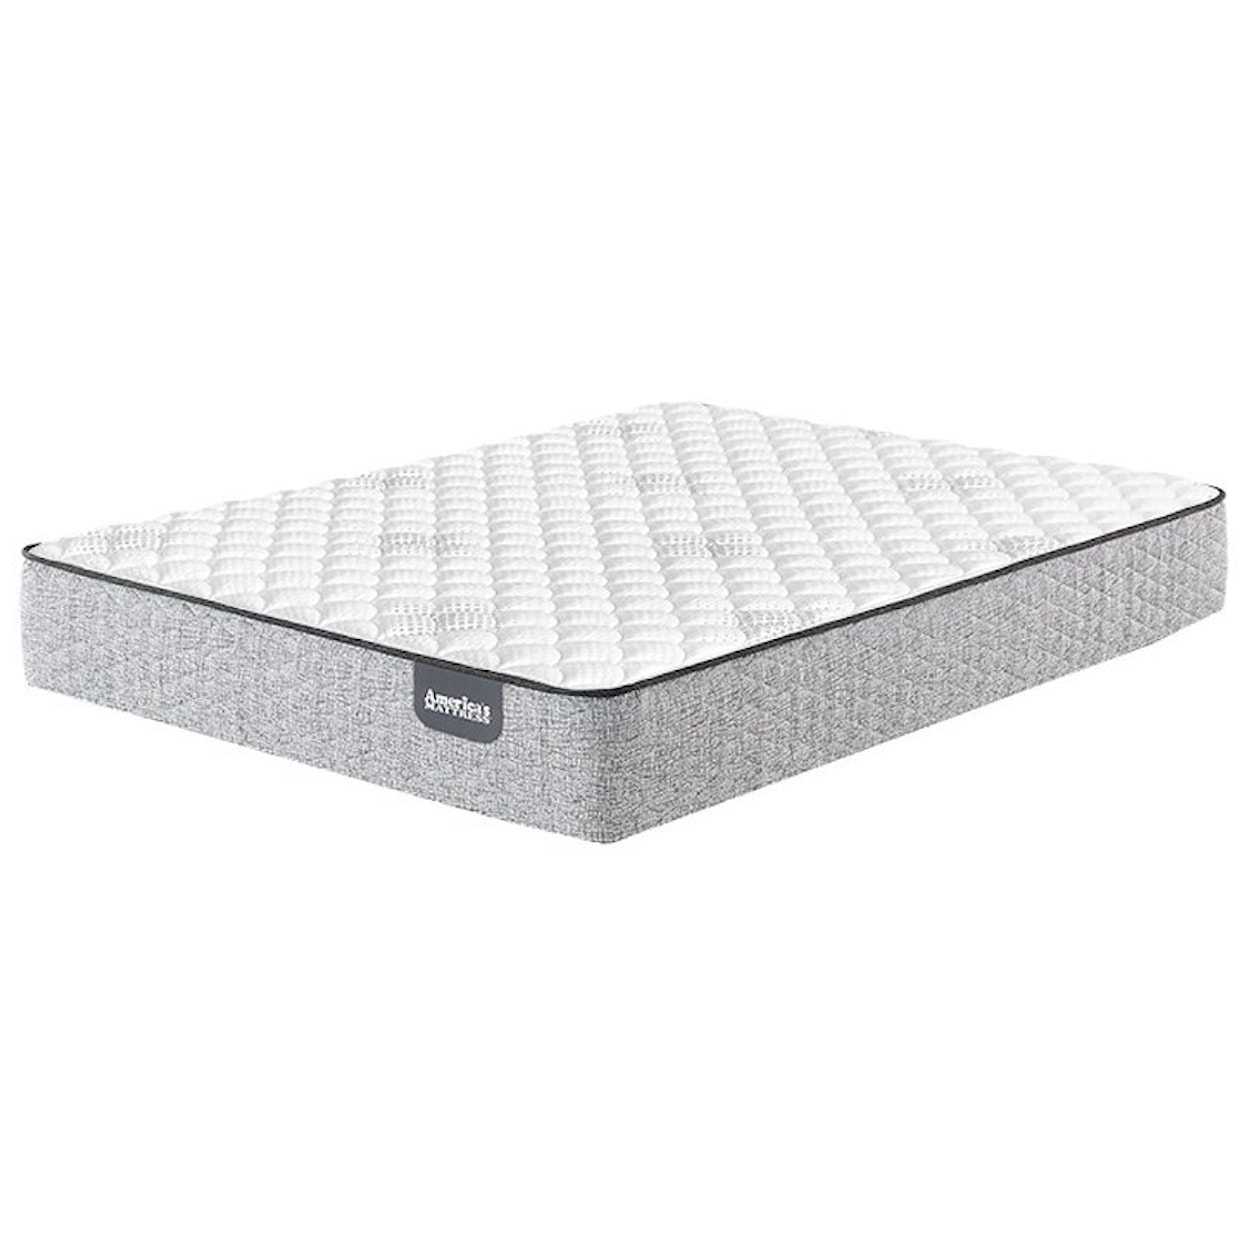 Serta Rayleigh Firm Cal King Pocketed Coil Mattress